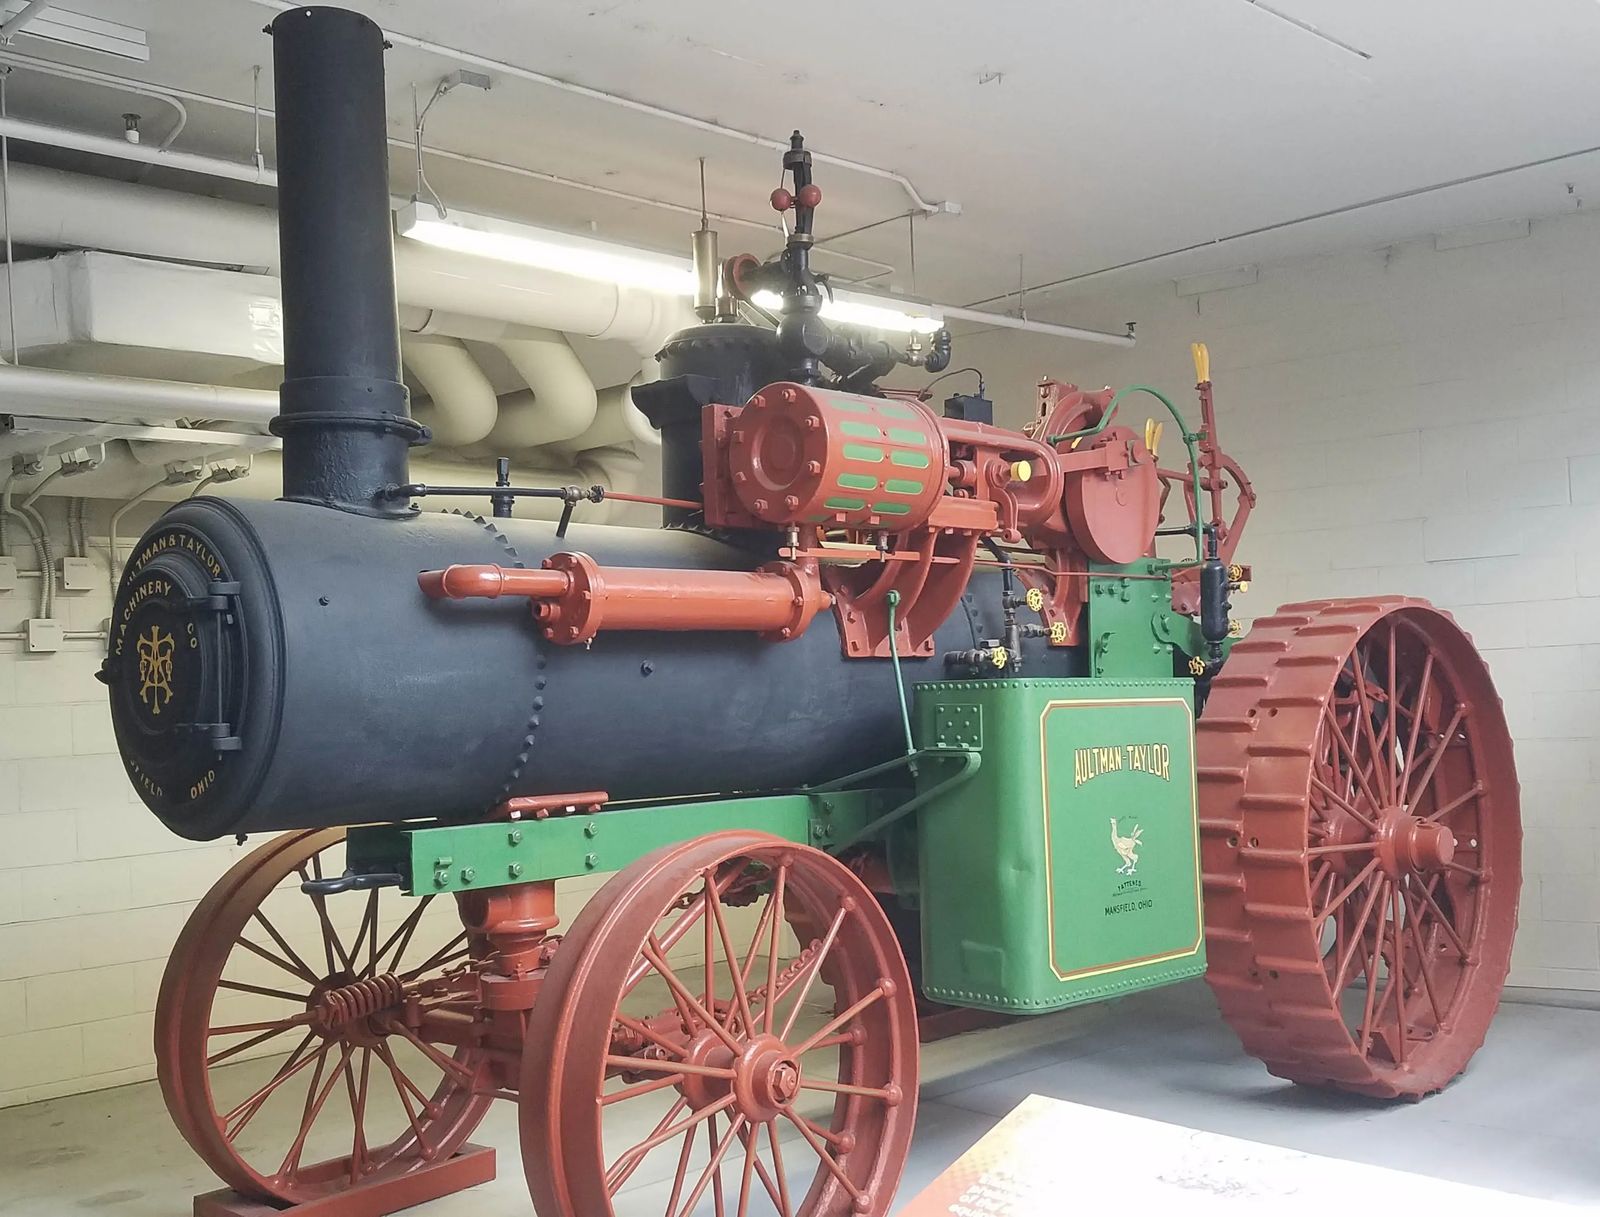 A photo of the Aultman Taylor tractor in Boise, Idaho.